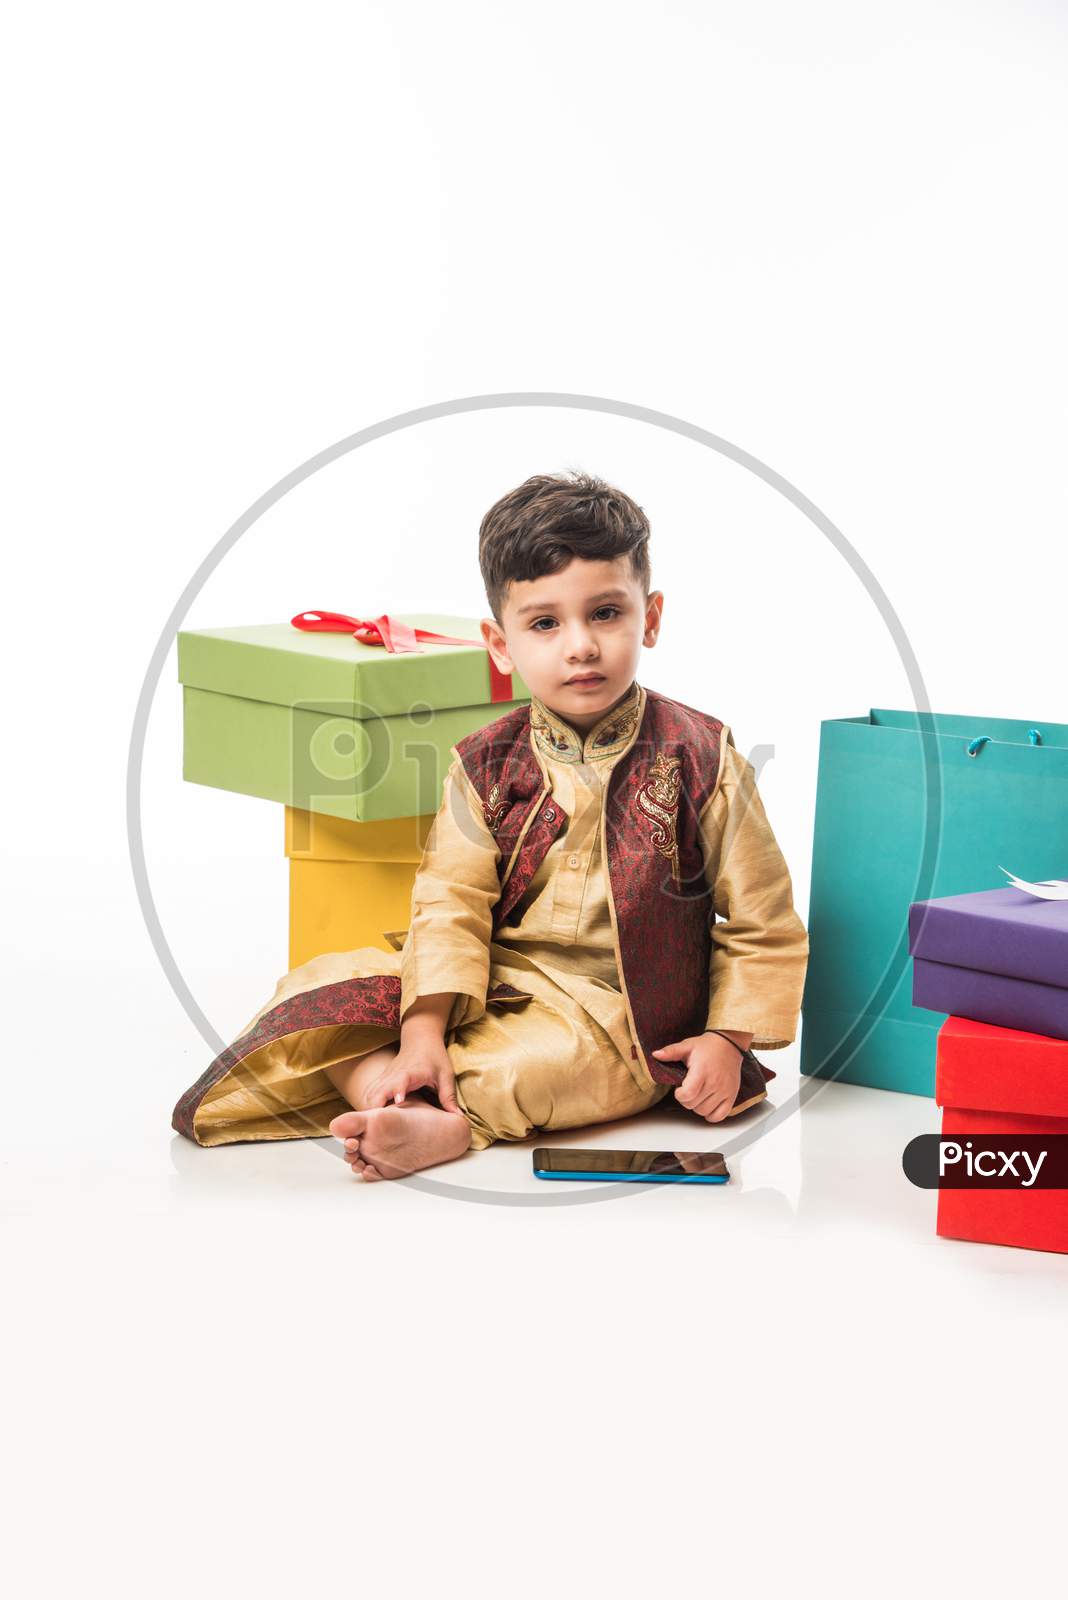 Portrait of Cute little Indian boy in traditional wear using smartphone / mobile playing games or watching videos, isolated over